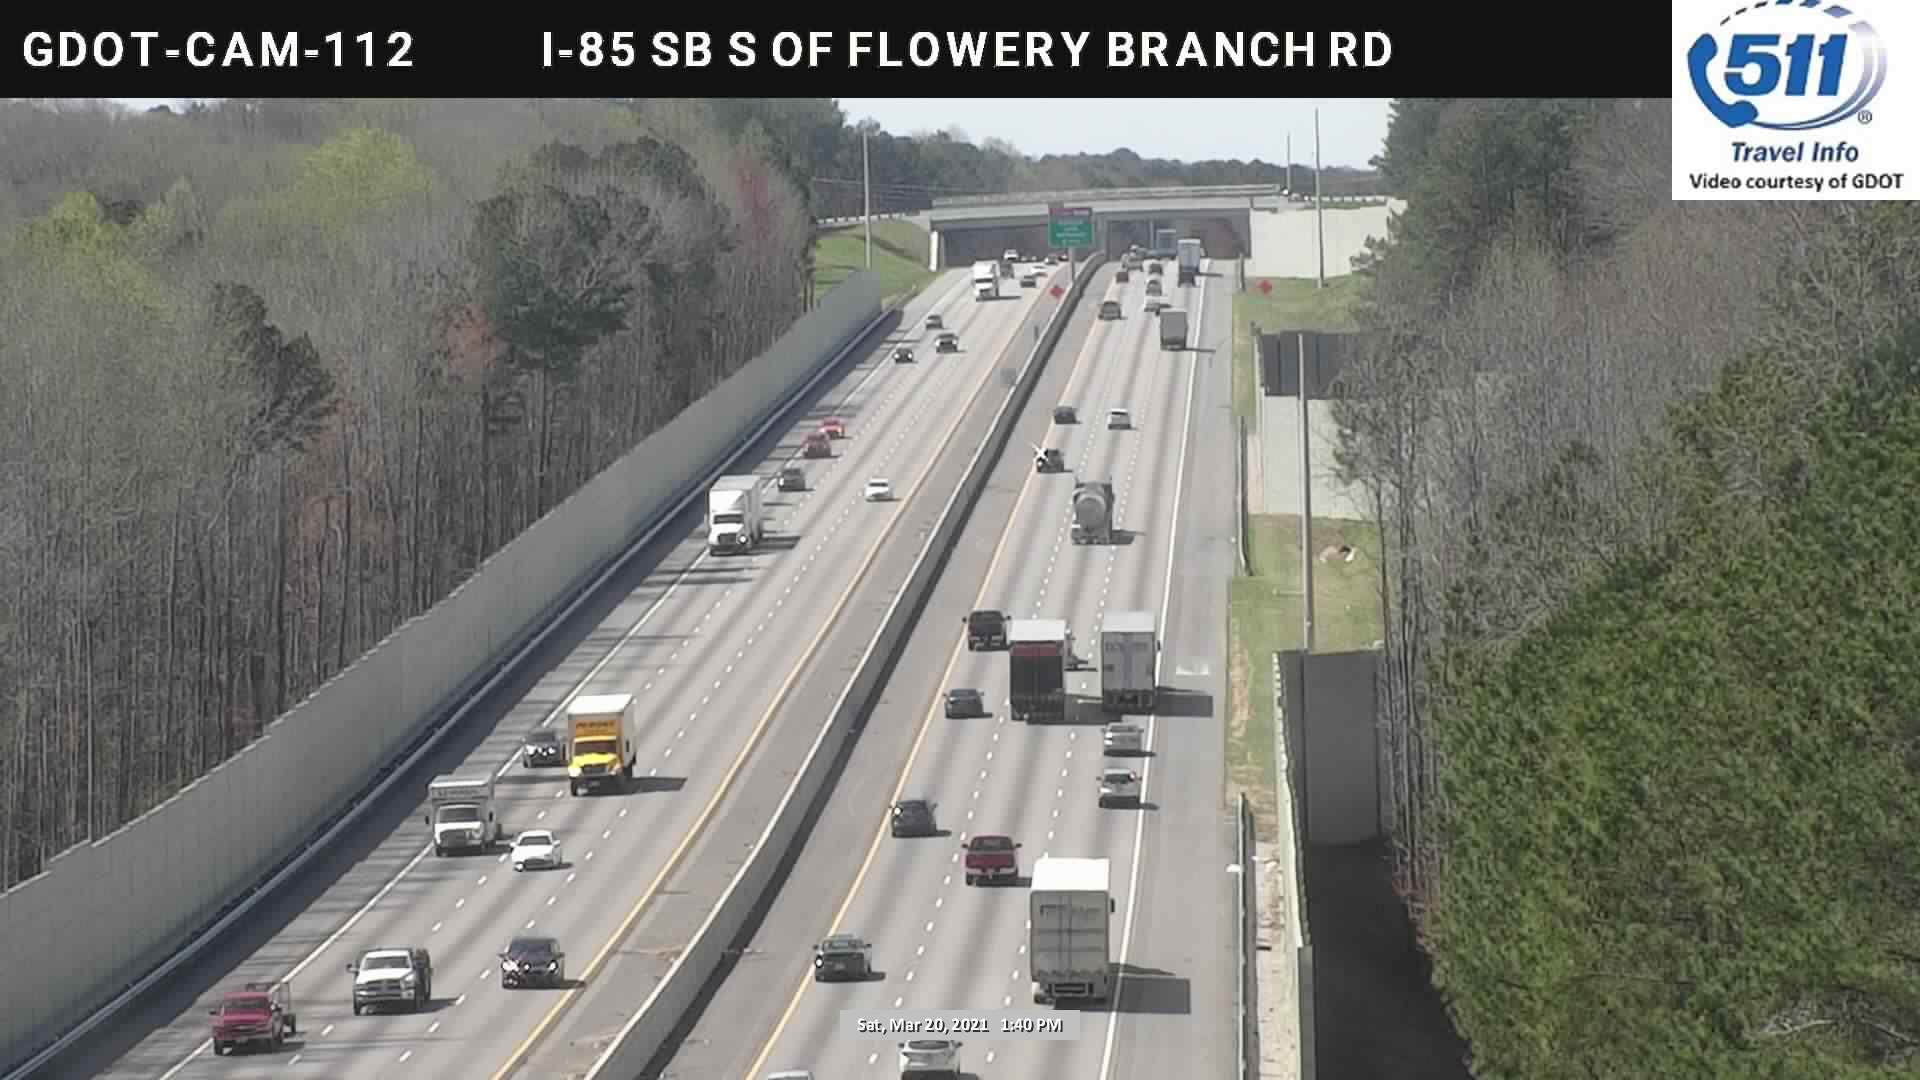 I-85 : S OF FLOWERY BRANCH RD (S) (46636) - Atlanta and Georgia